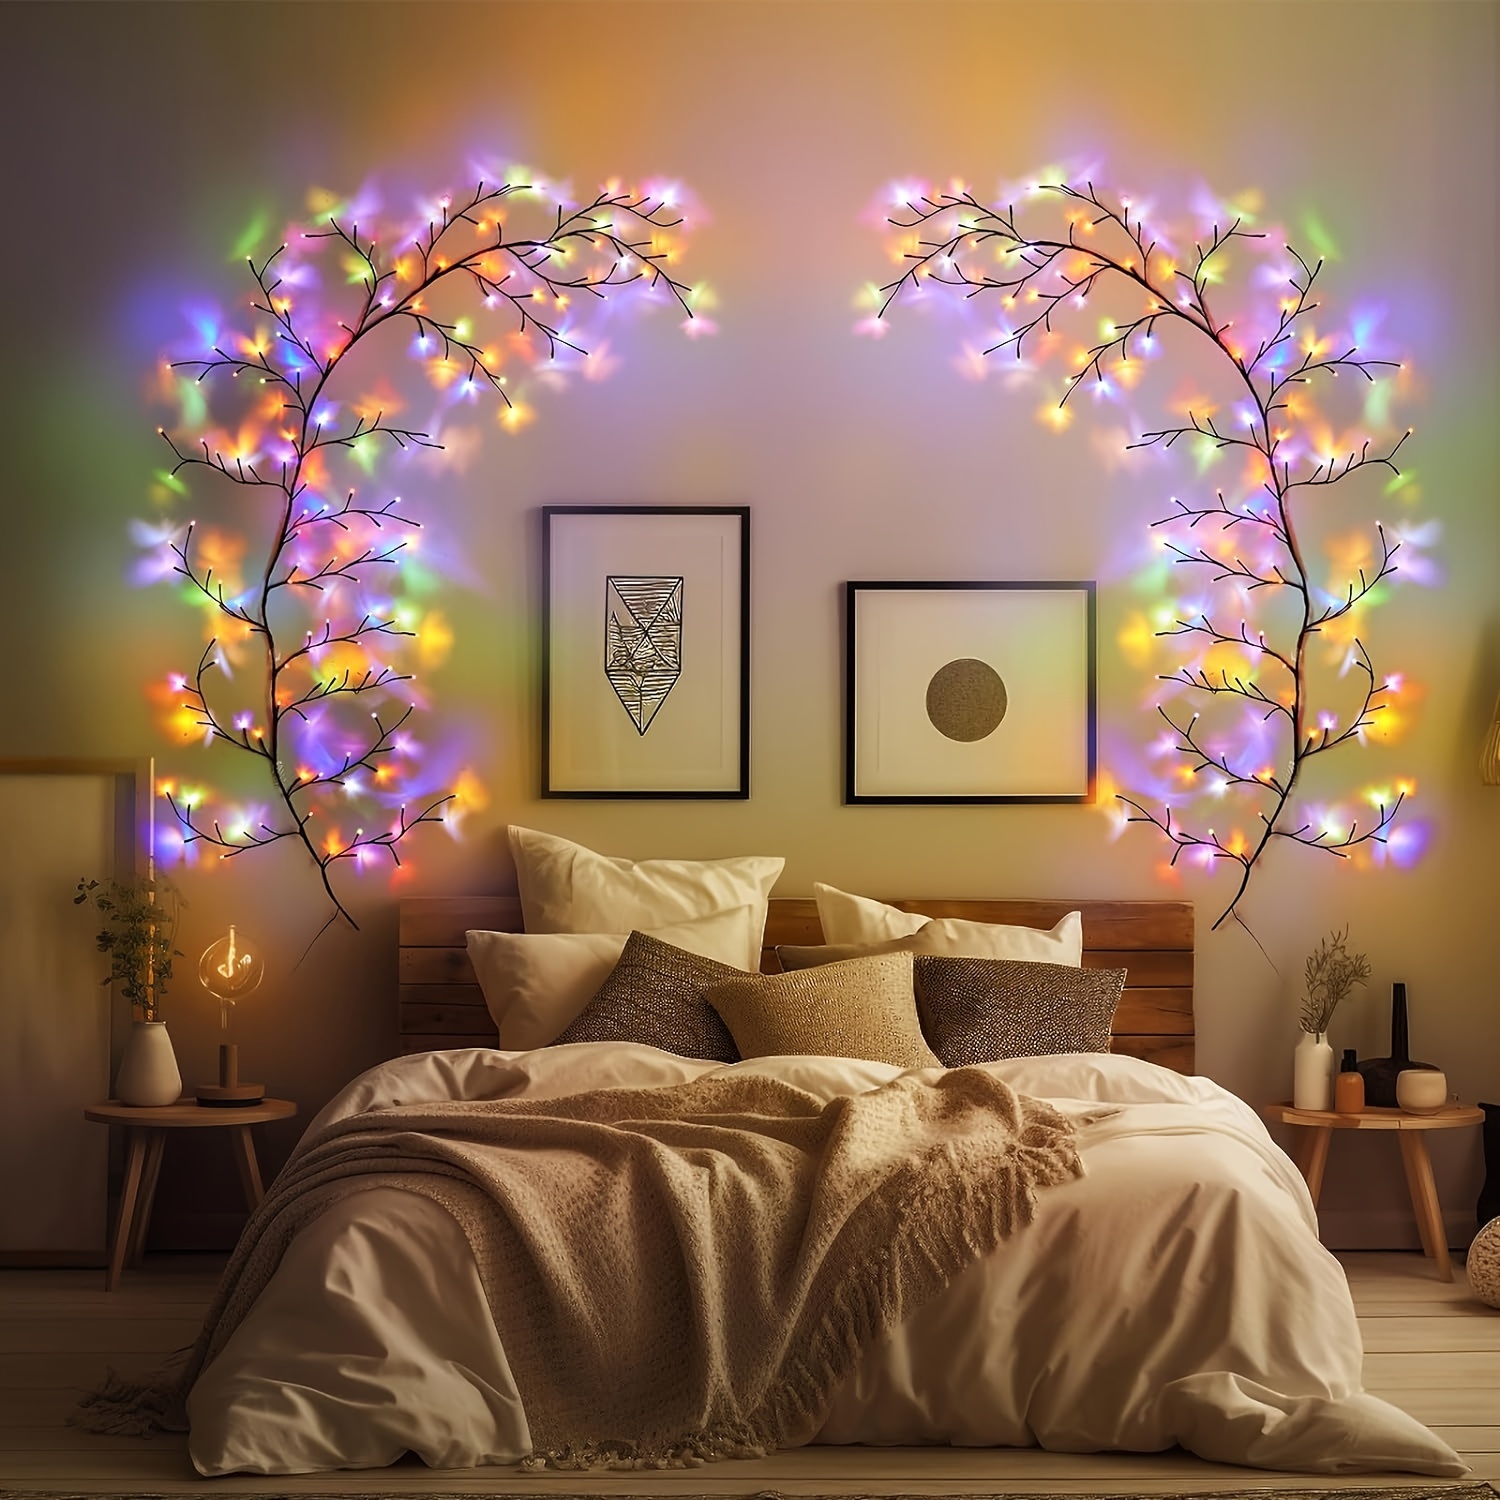 

1pc 1.8m/5.9ft Artificial Branches With Light 96 Leds Usb Plug In 8 Lighting Modes Wall Decoration Willow Vine Light For Valentine's Day Christmas Bedroom Home Party Birthday Decoration Eid Mubarak